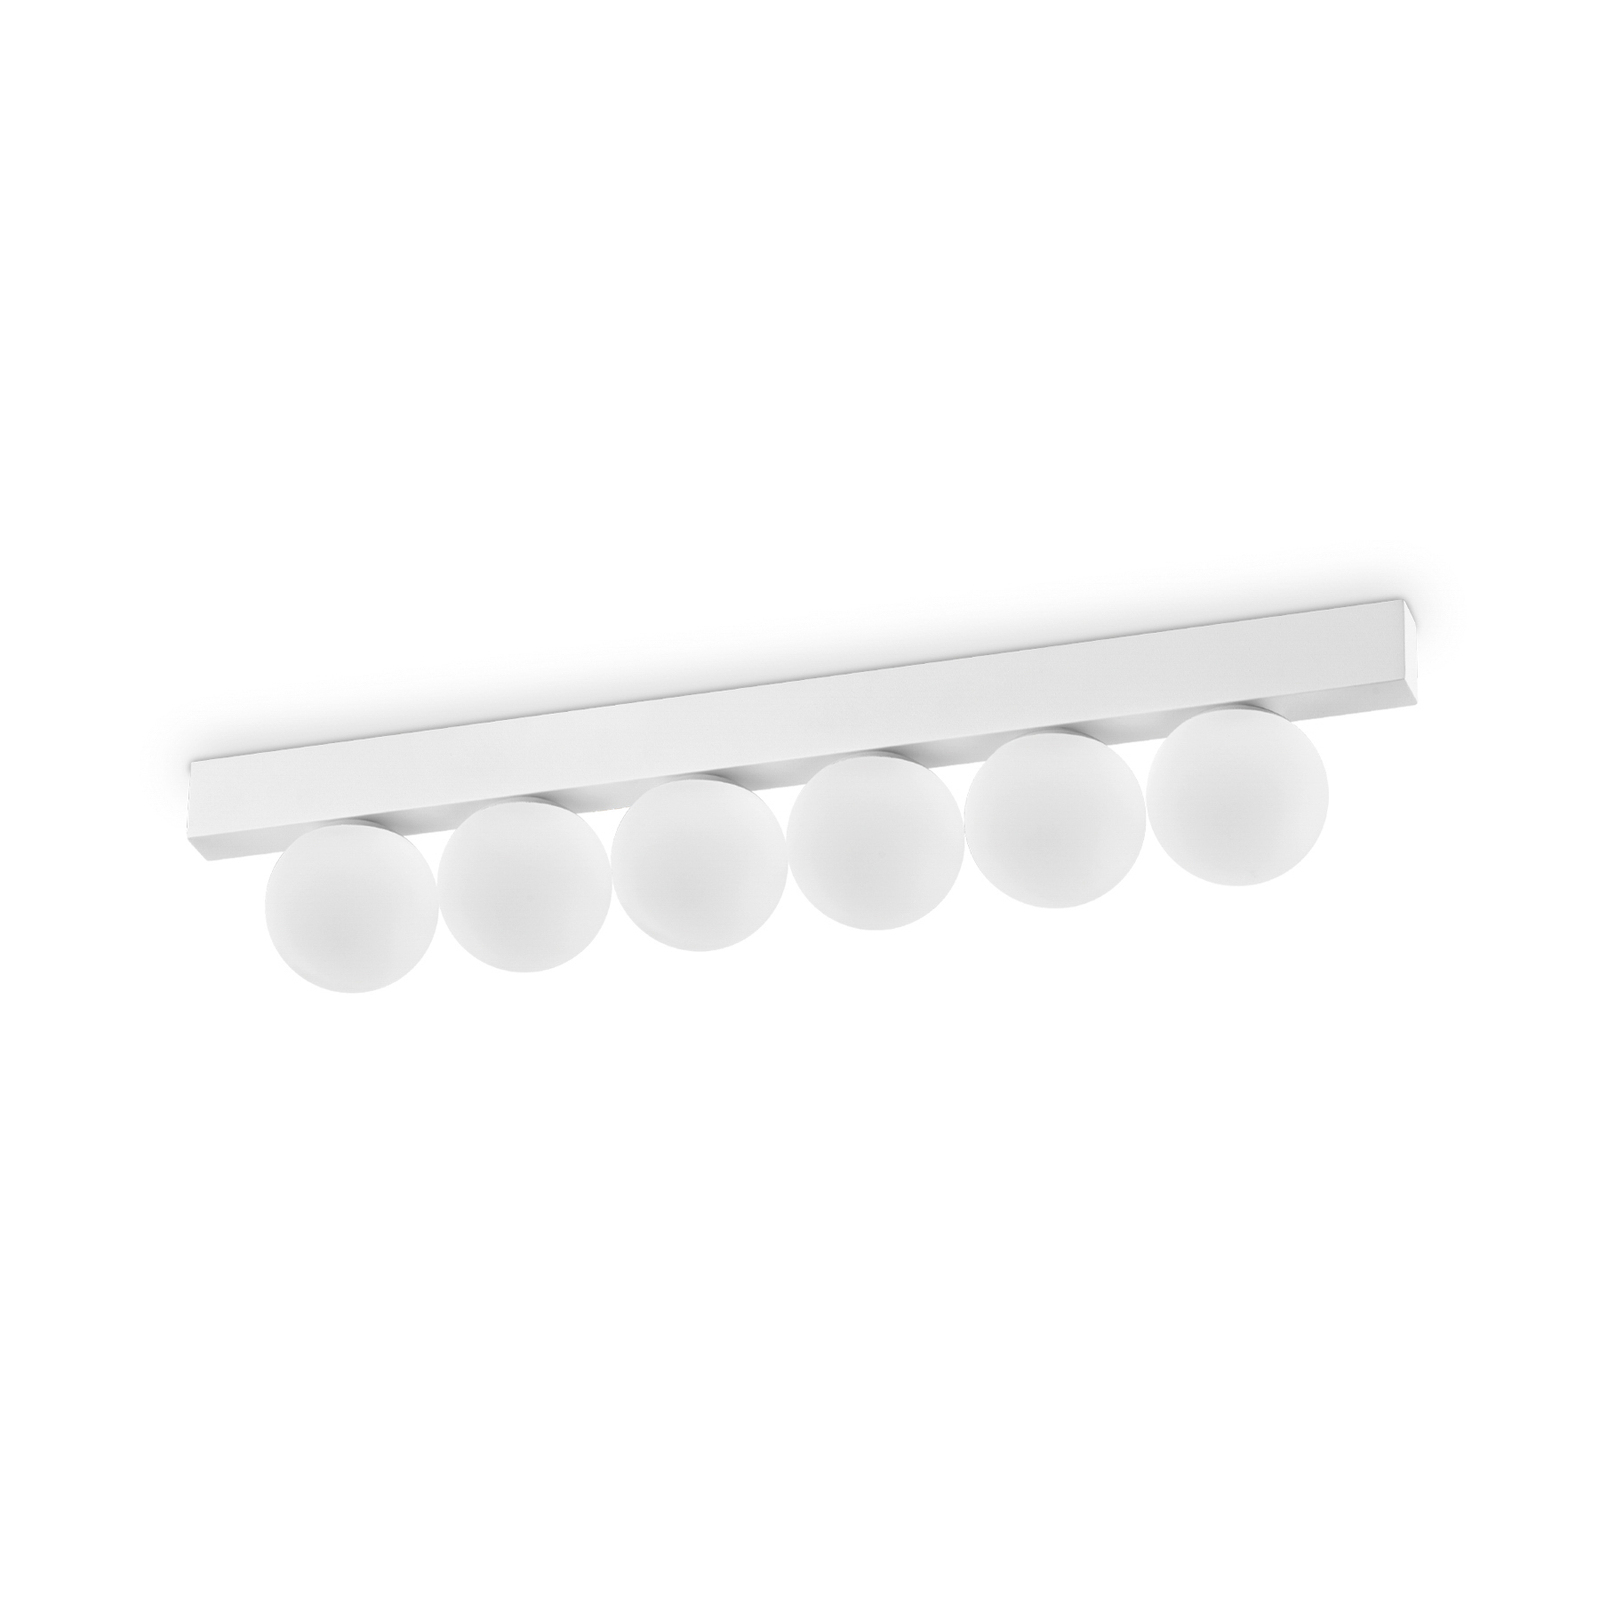 Ideal Lux LED ceiling lamp Ping Pong white 6-bulb, opal glass